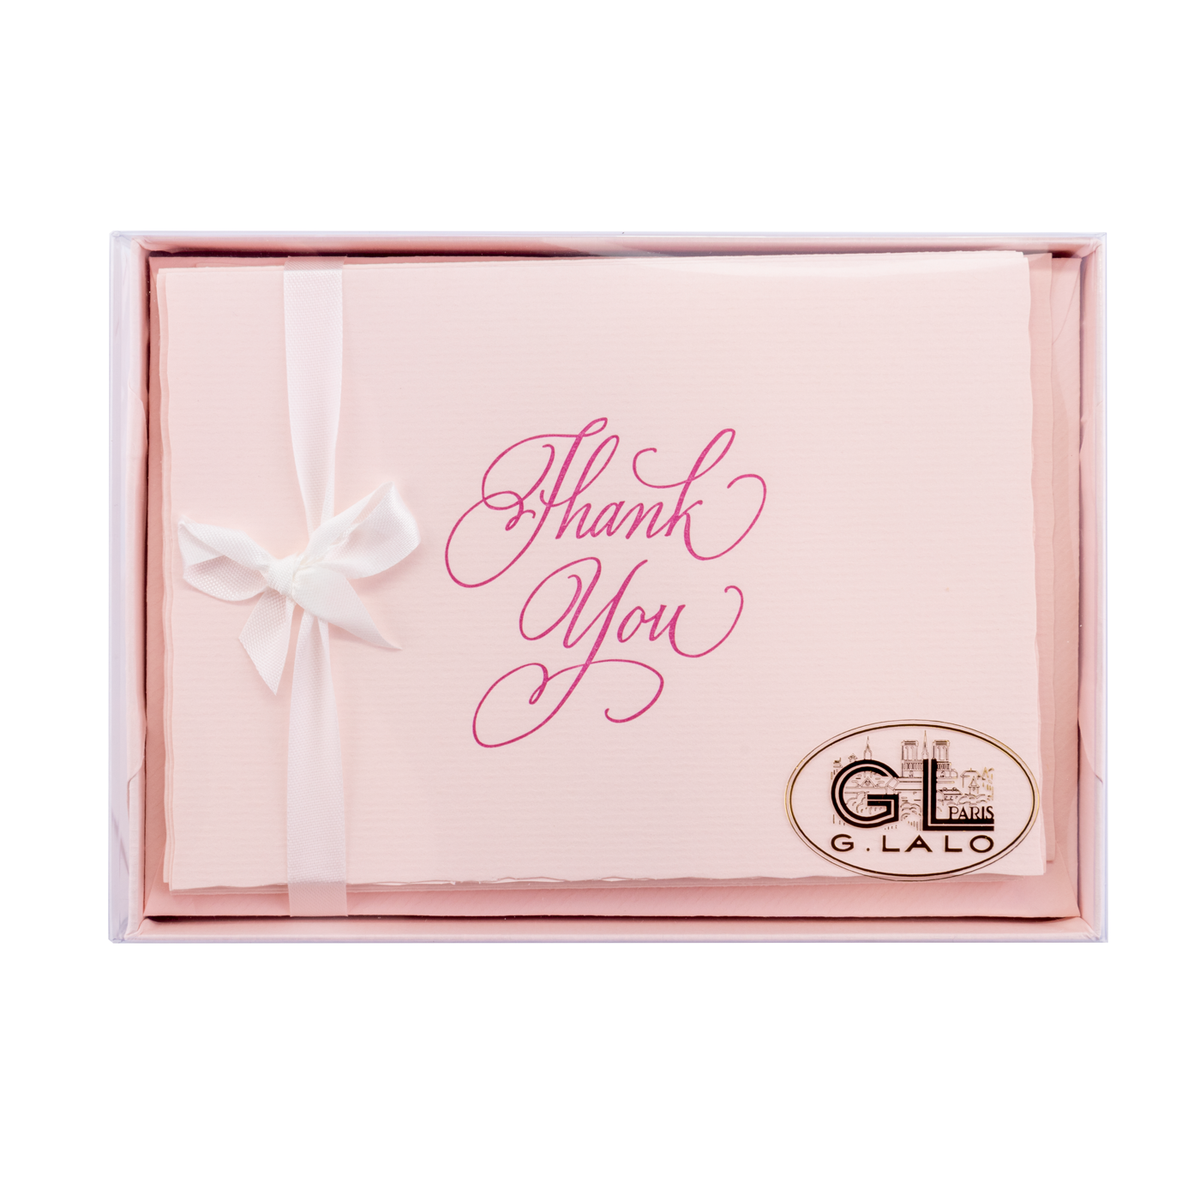 G. Lalo Thank You Gift Box 4 ¼ x 6- Rose